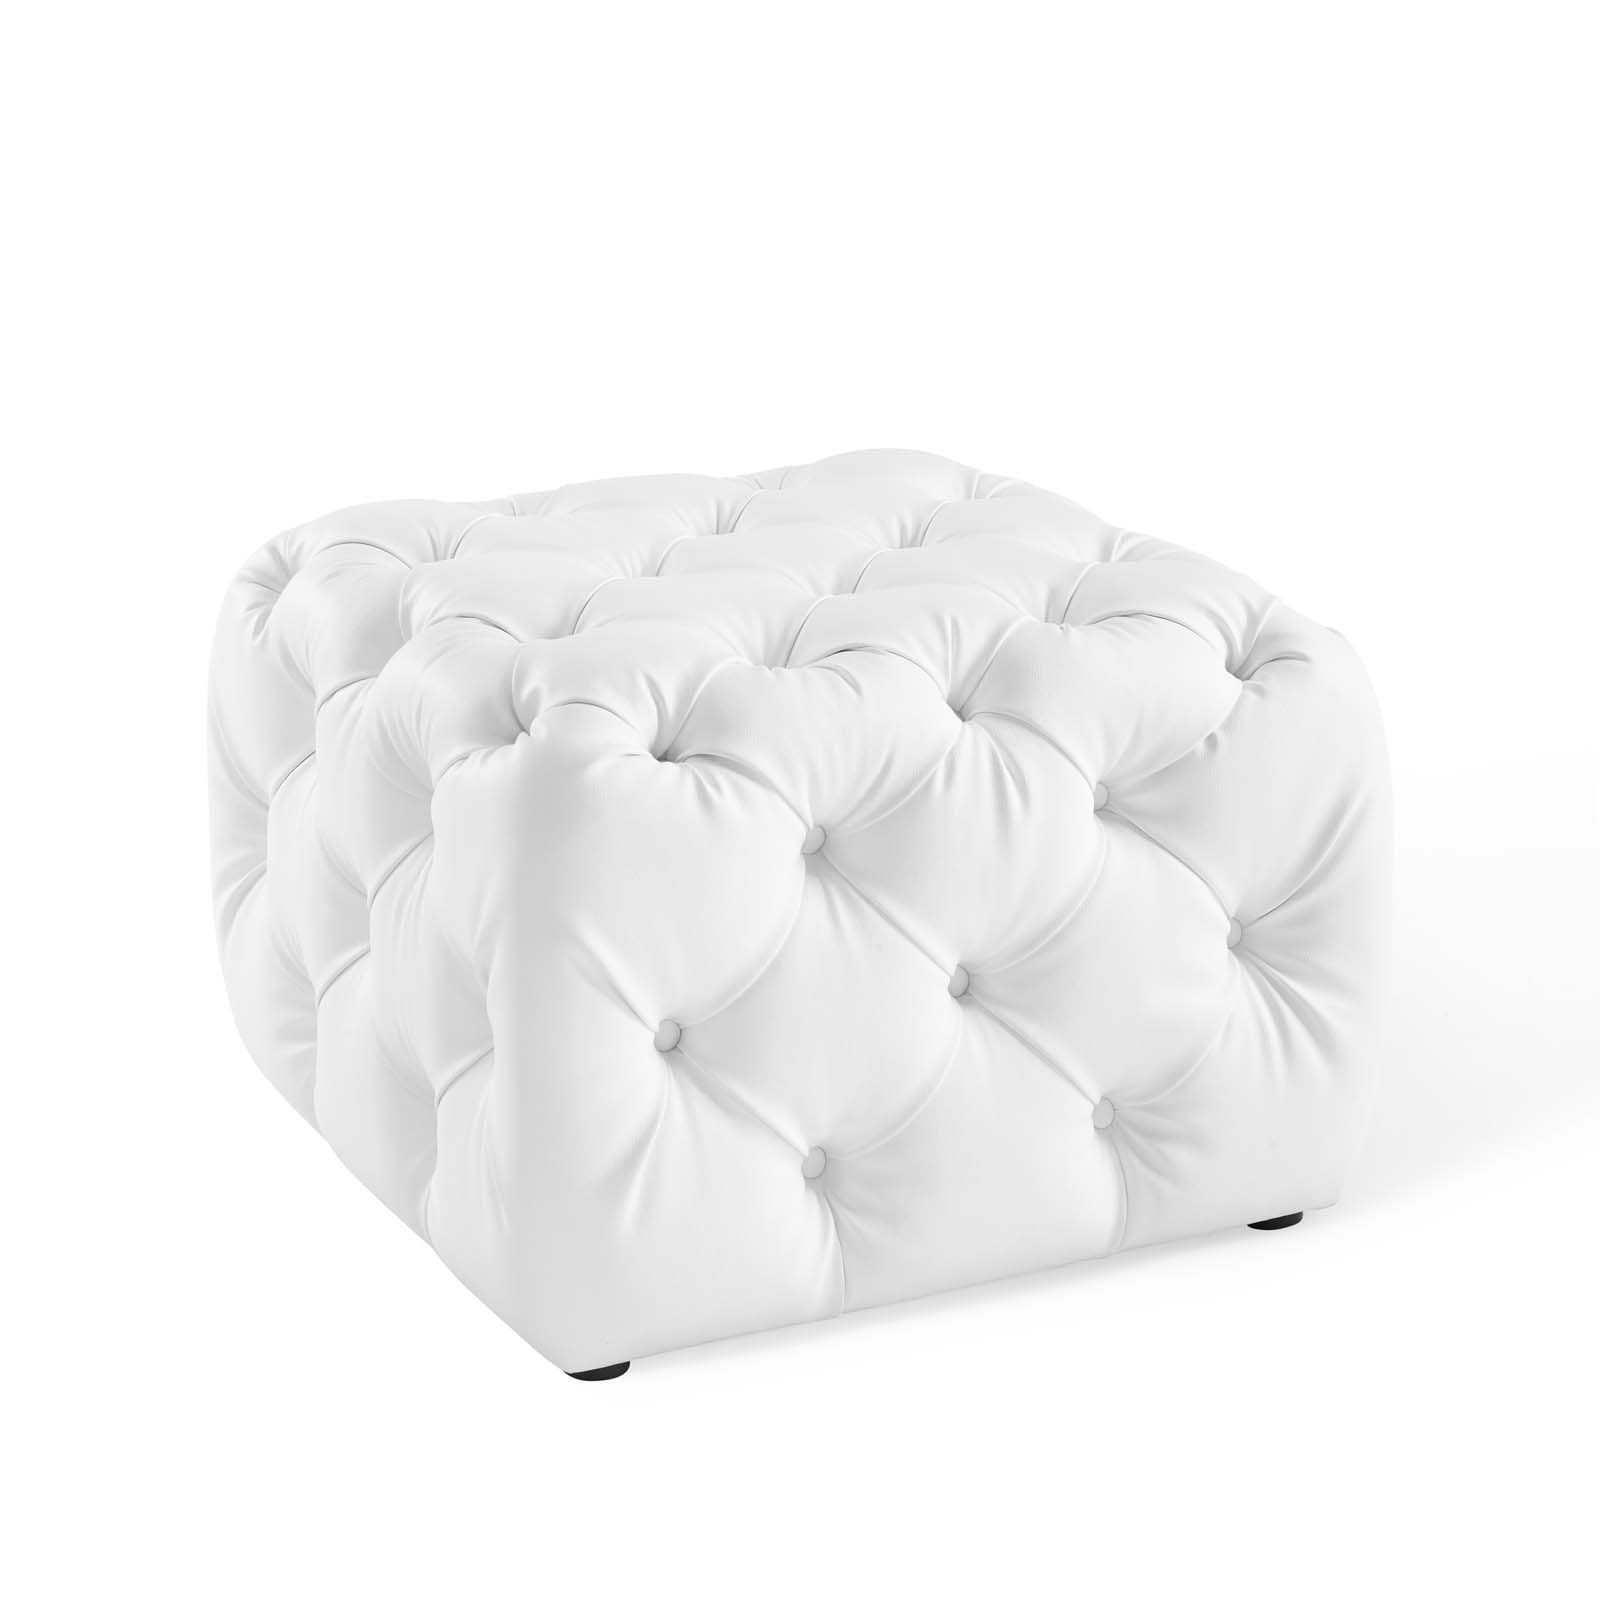 Anthem Tufted Button Square Faux Leather Ottoman White Regarding White And Blush Fabric Square Ottomans (View 6 of 20)